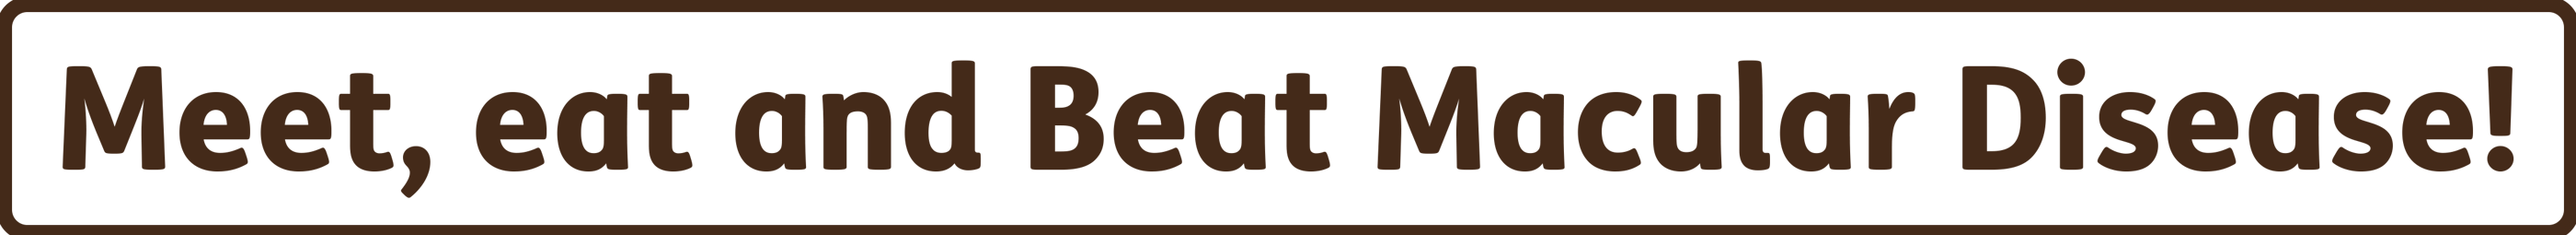 Meet, eat and 